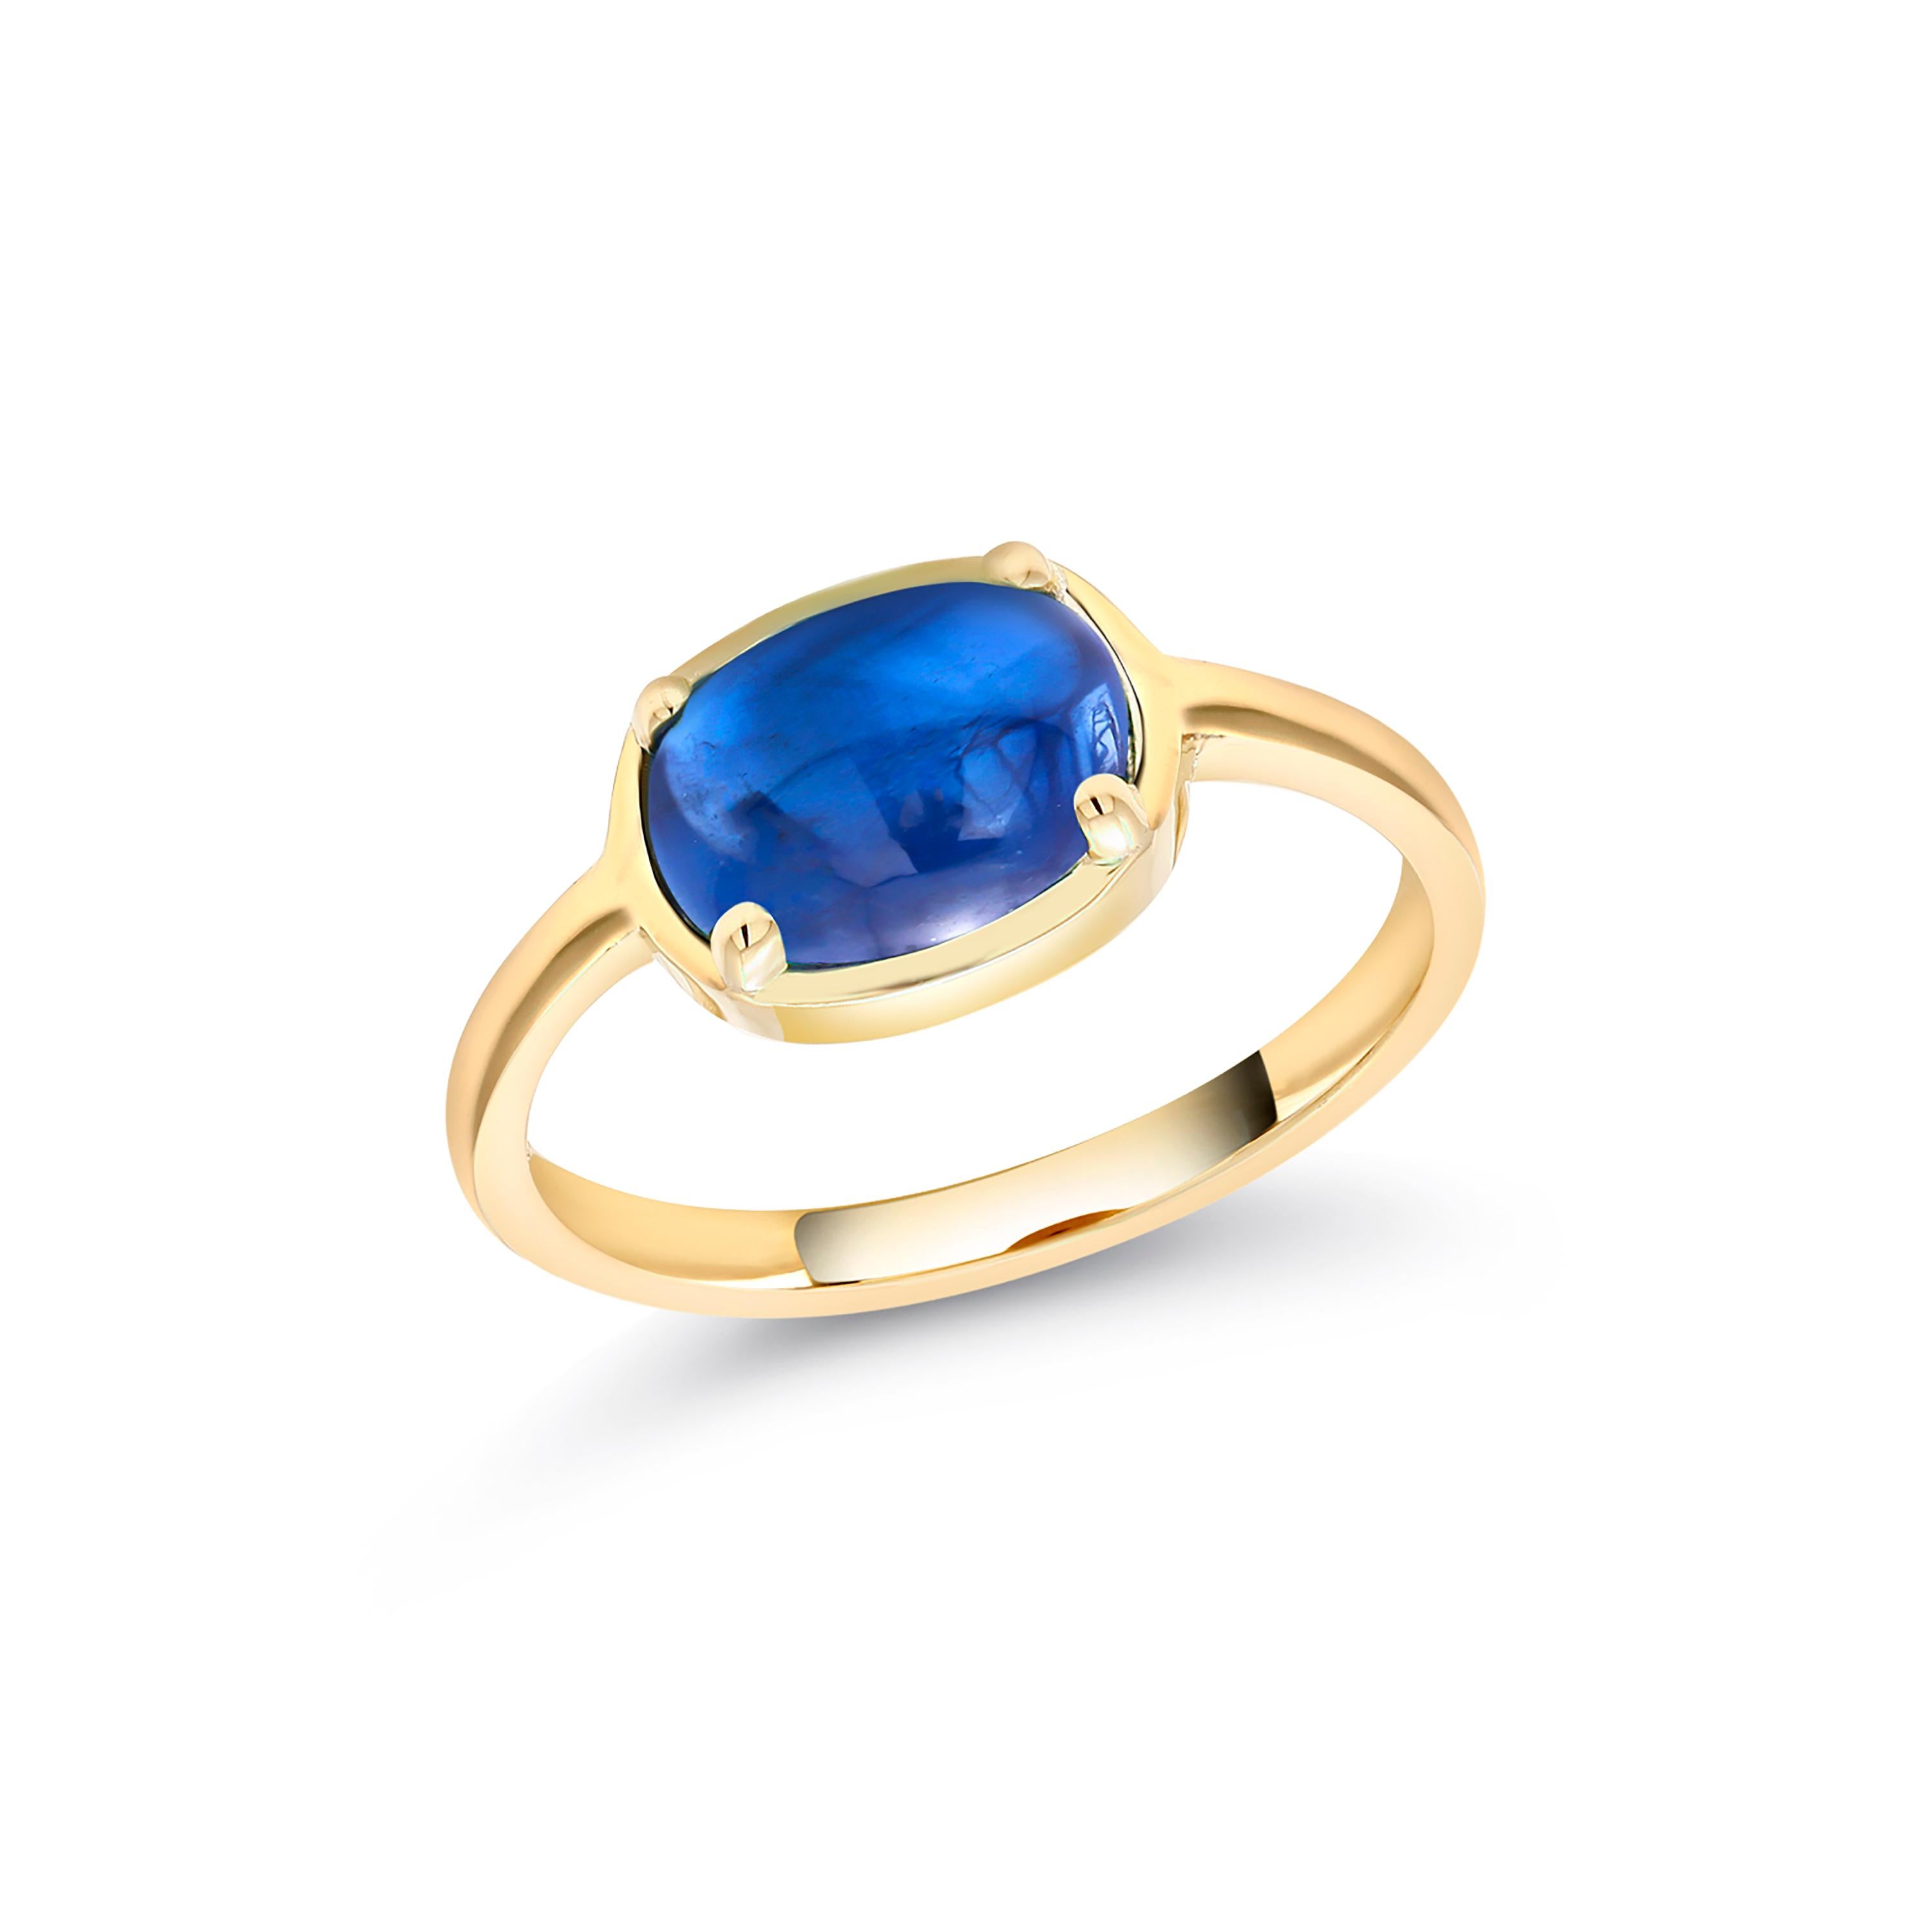 Oval Cut Ceylon Cabochon Sapphire Weighing 4.20 Carat Yellow Gold Cocktail Ring